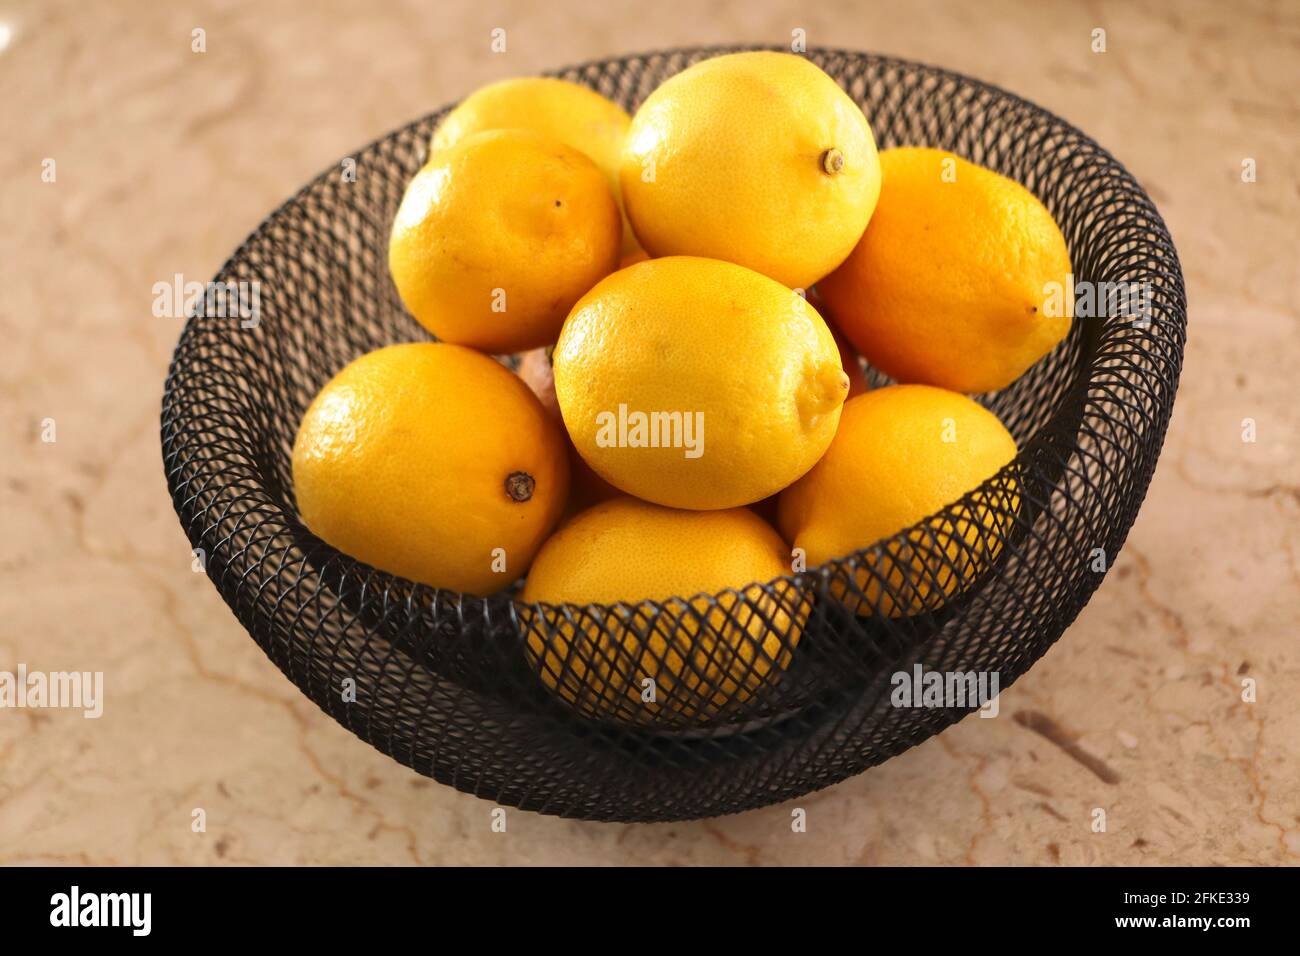 Bunch of yellow lemons in black wire basket Stock Photo